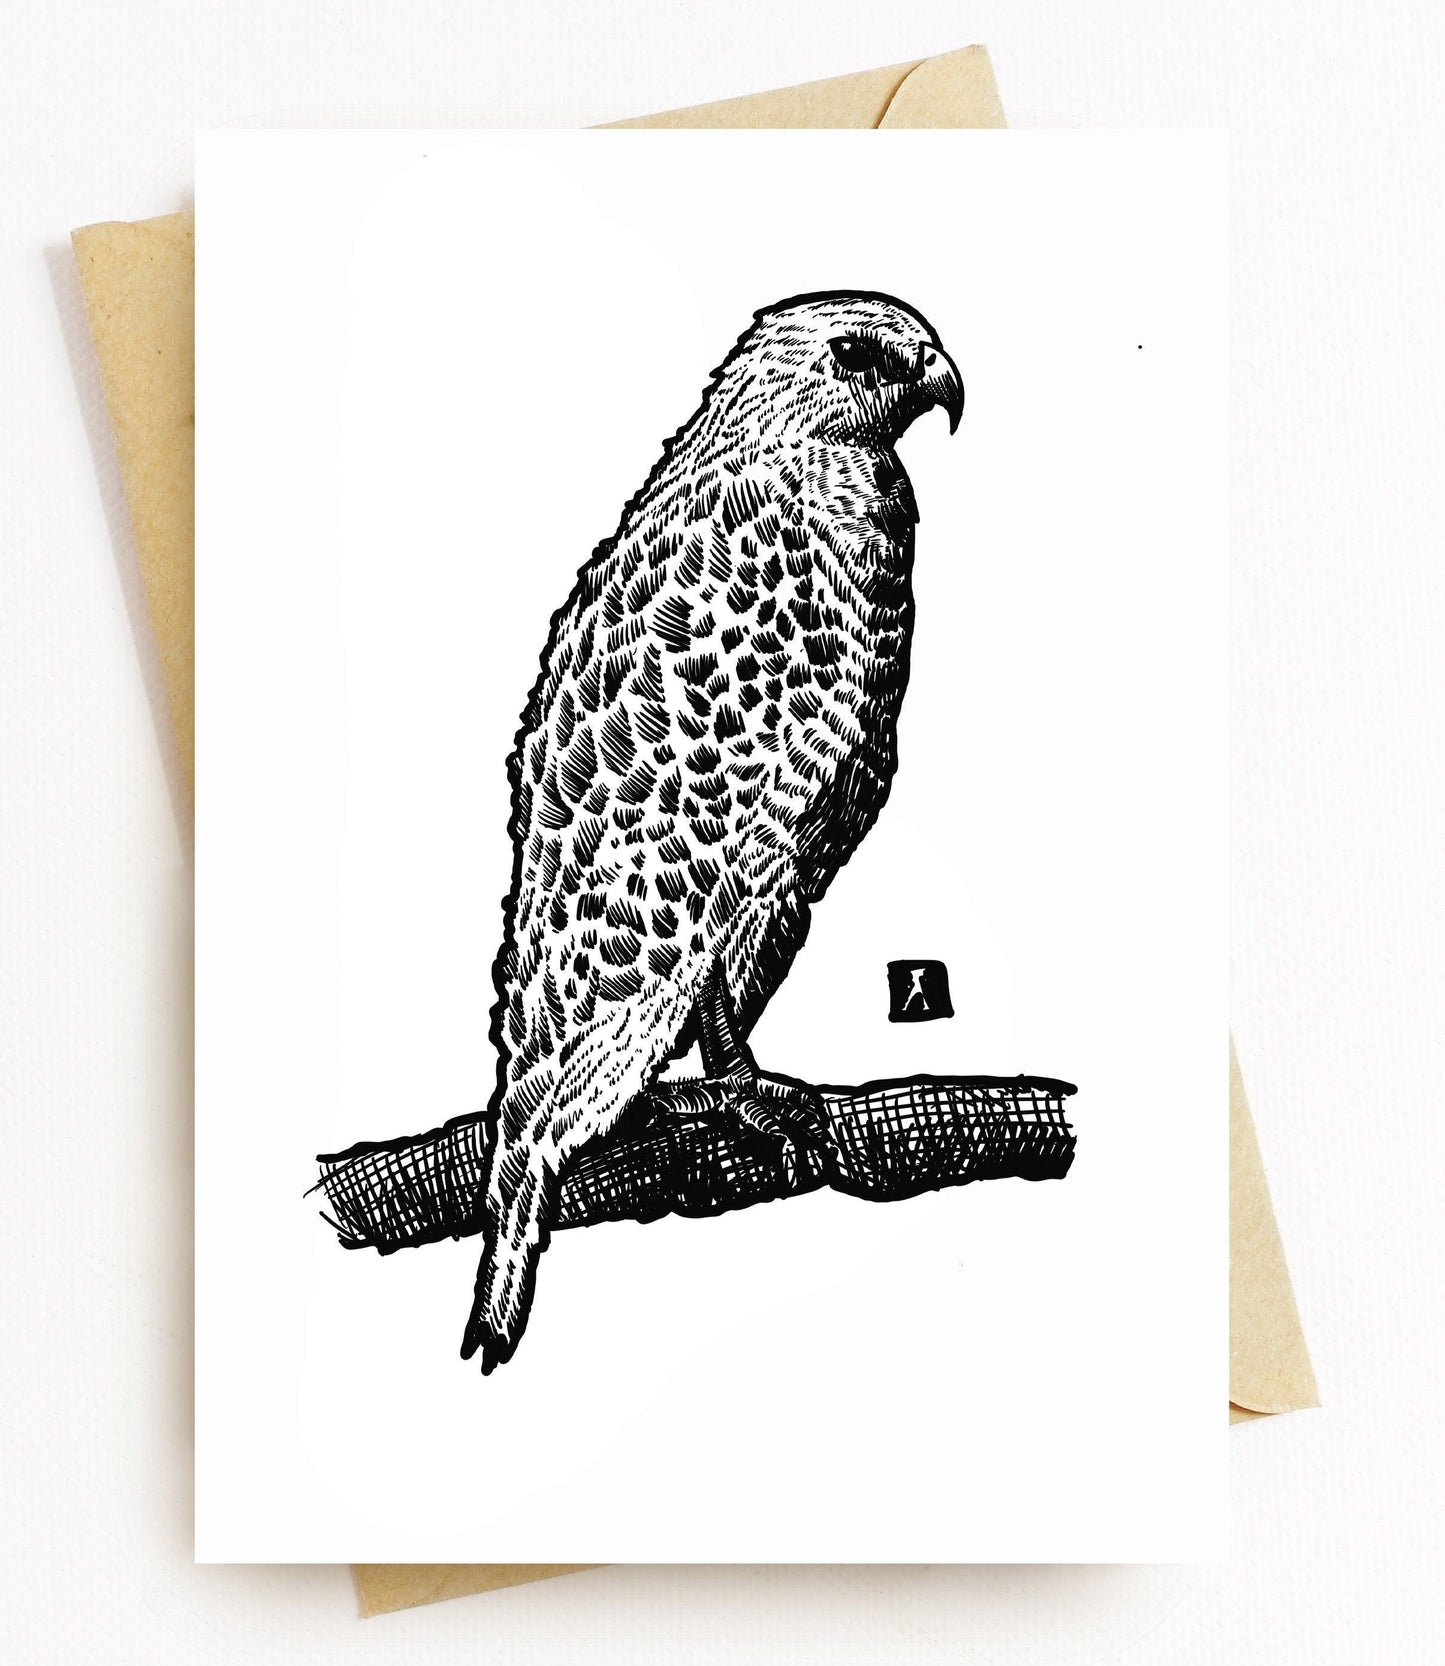 BellavanceInk: Greeting Card With A Falcon Pen & Ink Illustration 5 x 7 Inches - BellavanceInk